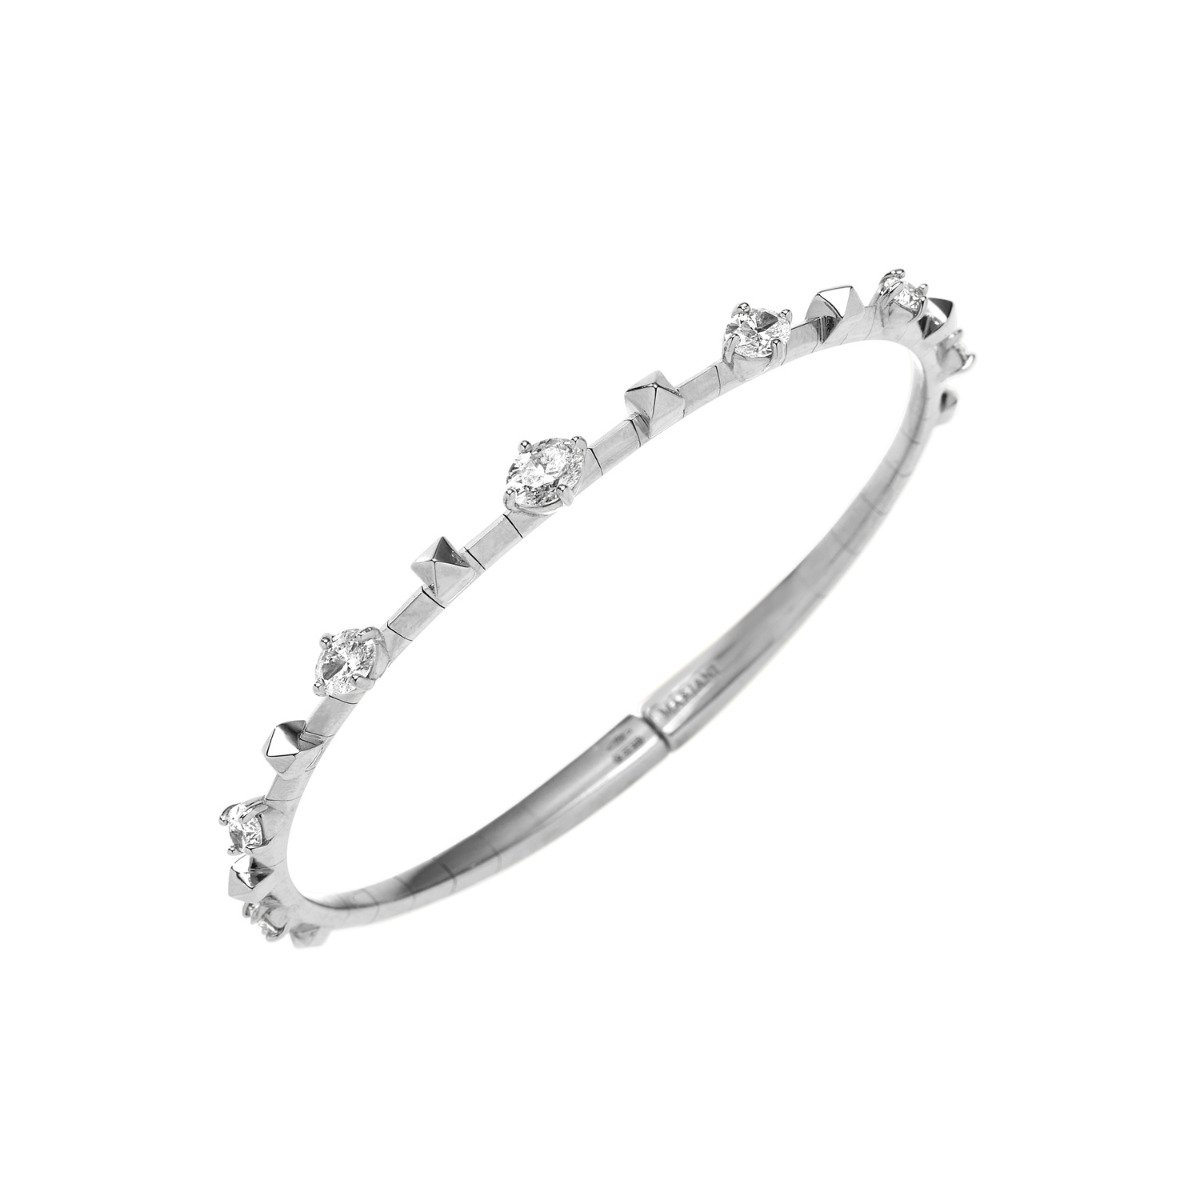 Mariani 18kt white gold fancy diamond bracelet with white diamonds, weighing 1.89 total carats